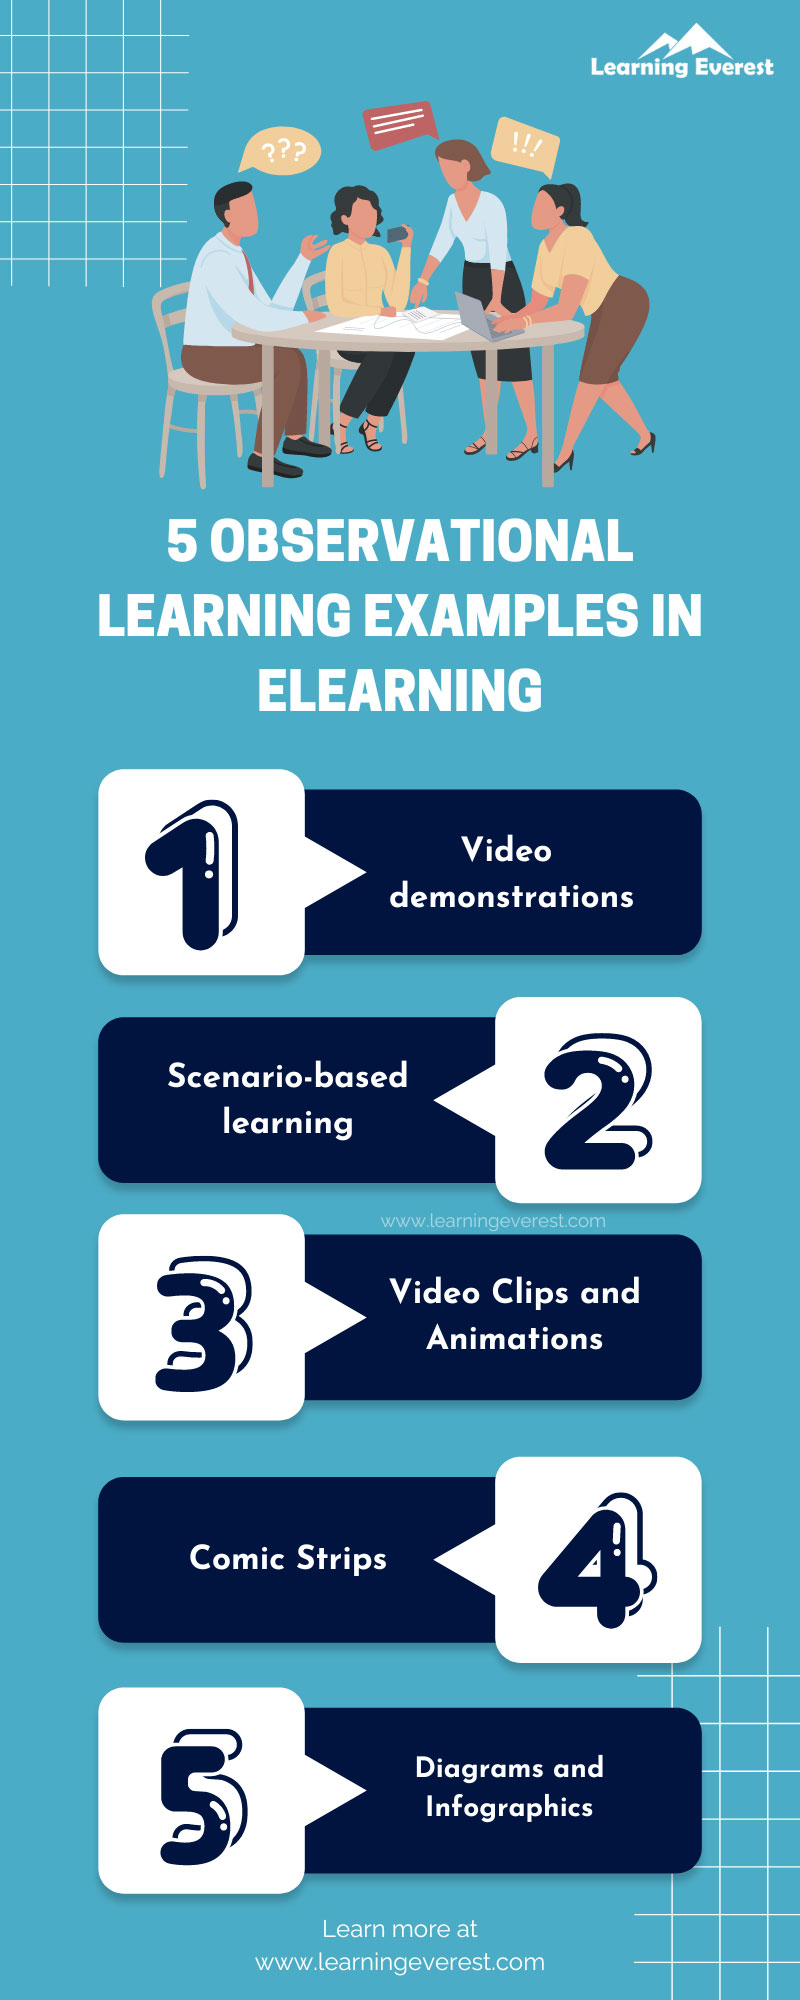 Observational Learning Examples in eLearning